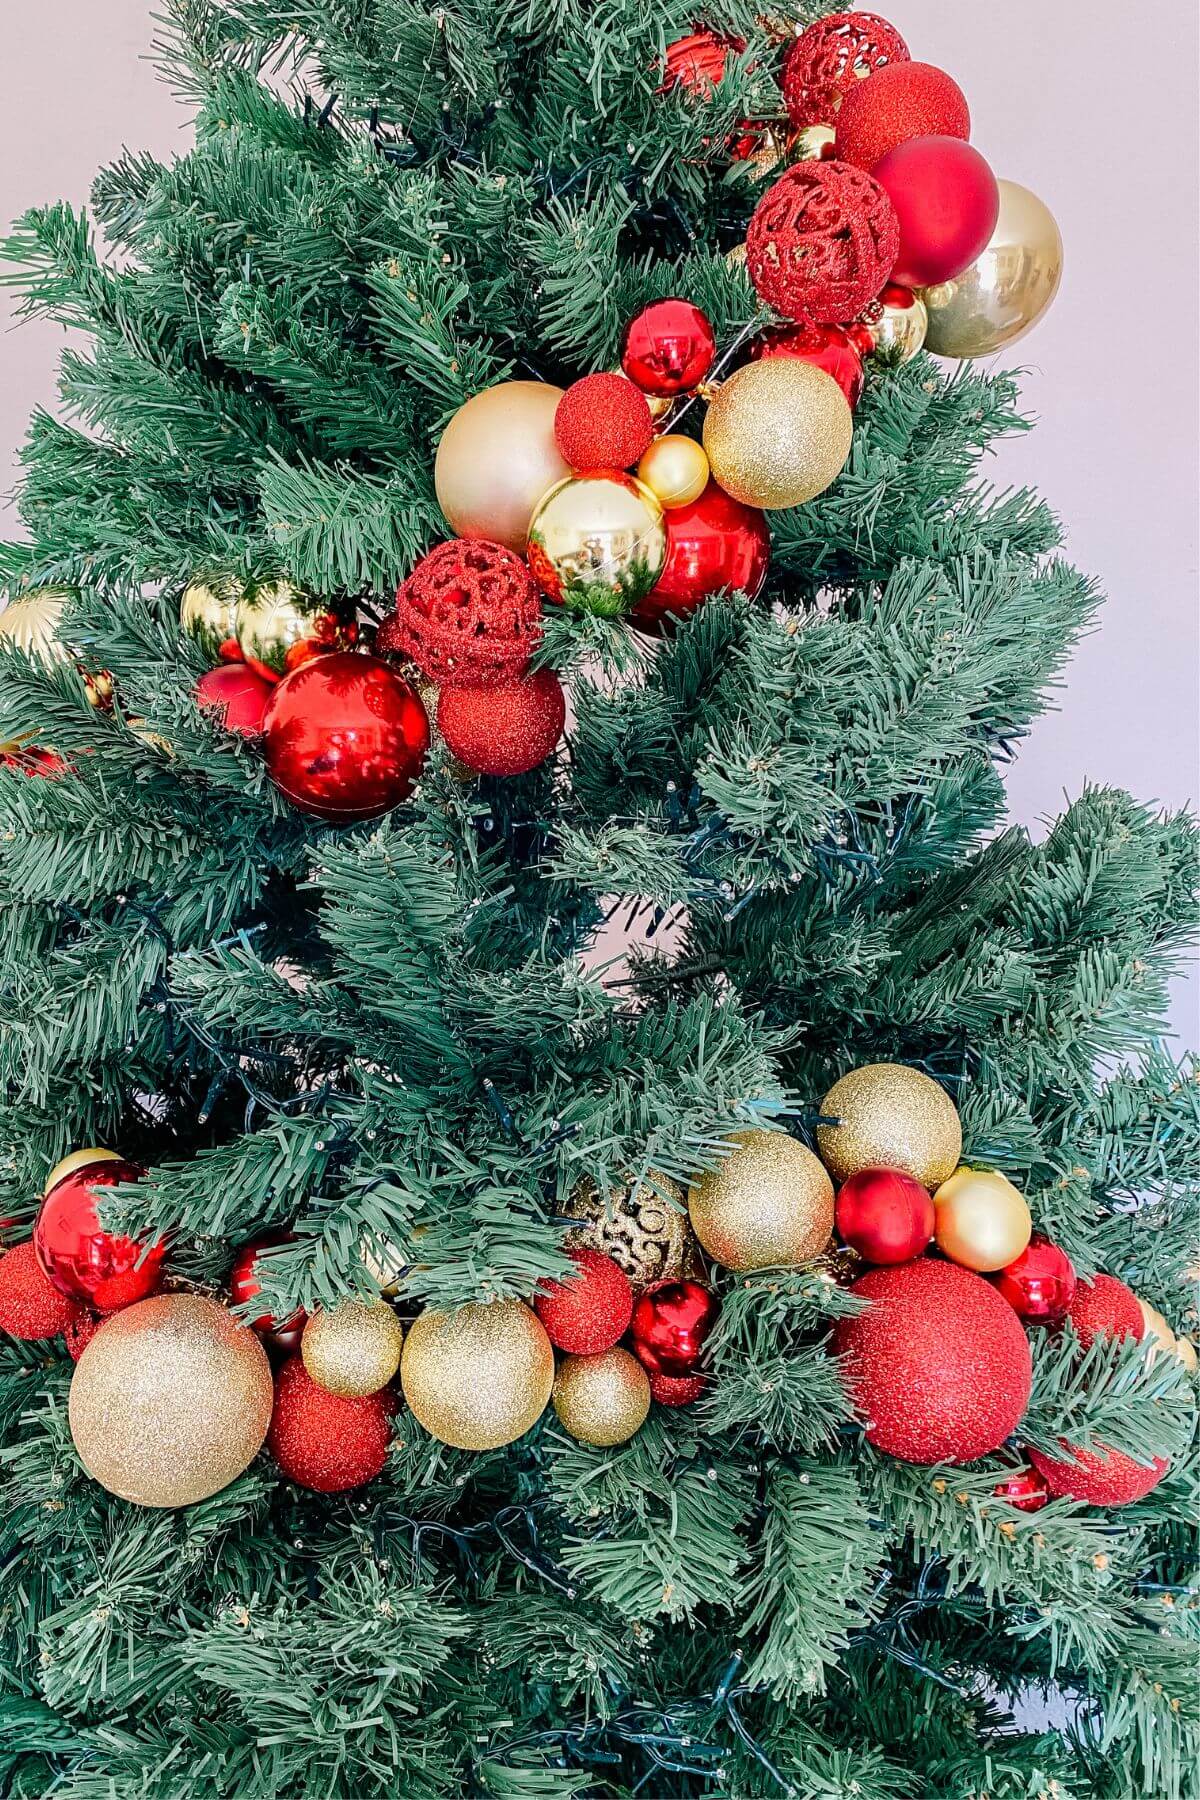 Garland in christmas tree